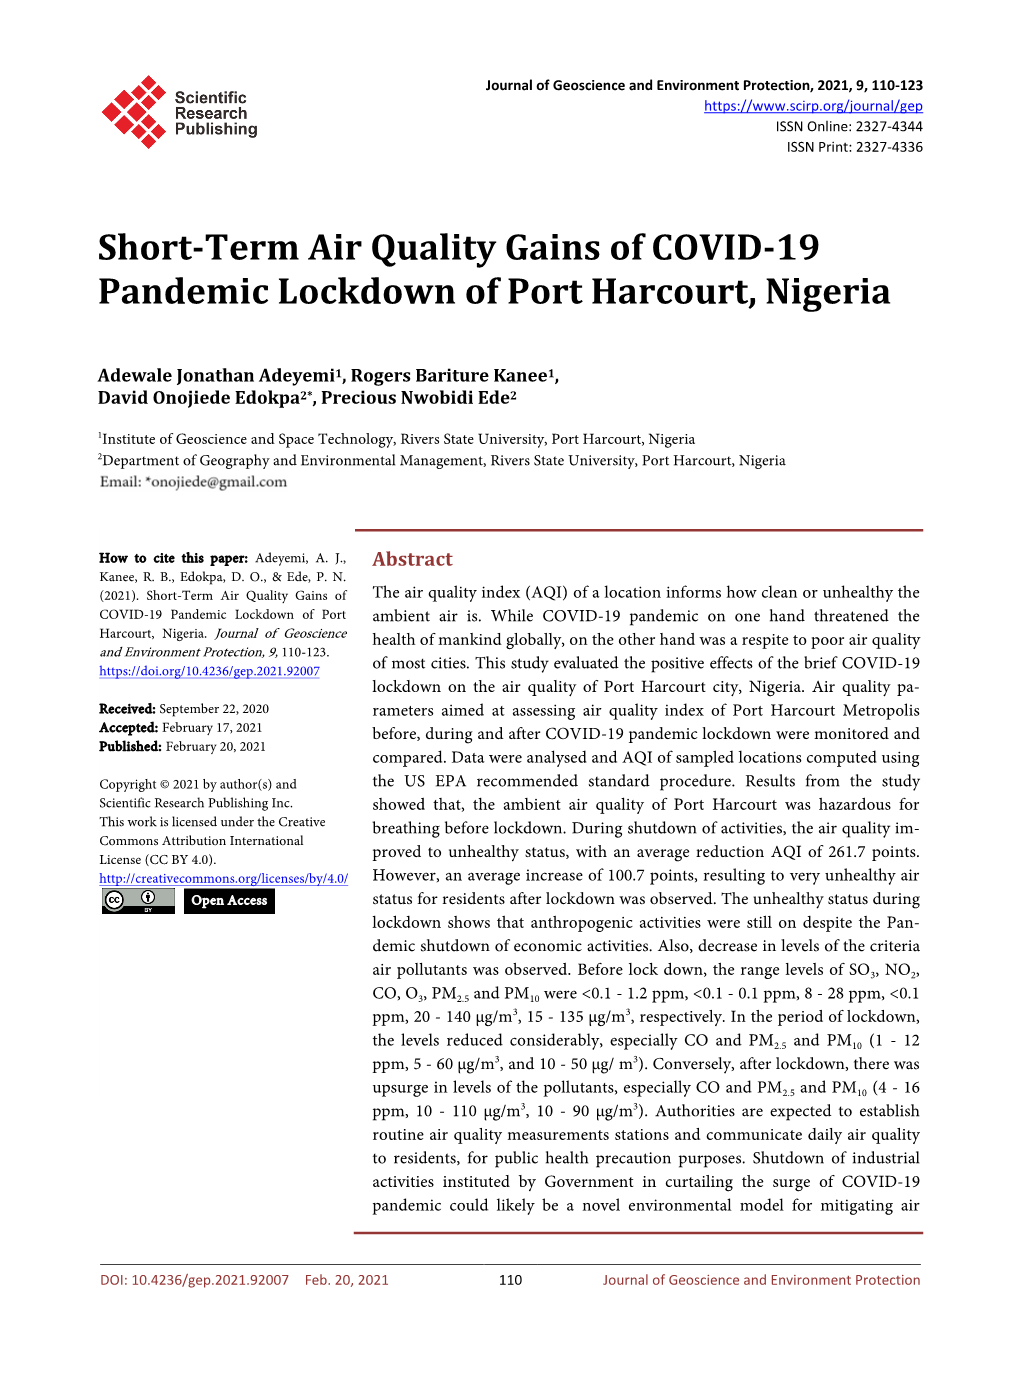 Short-Term Air Quality Gains of COVID-19 Pandemic Lockdown of Port Harcourt, Nigeria